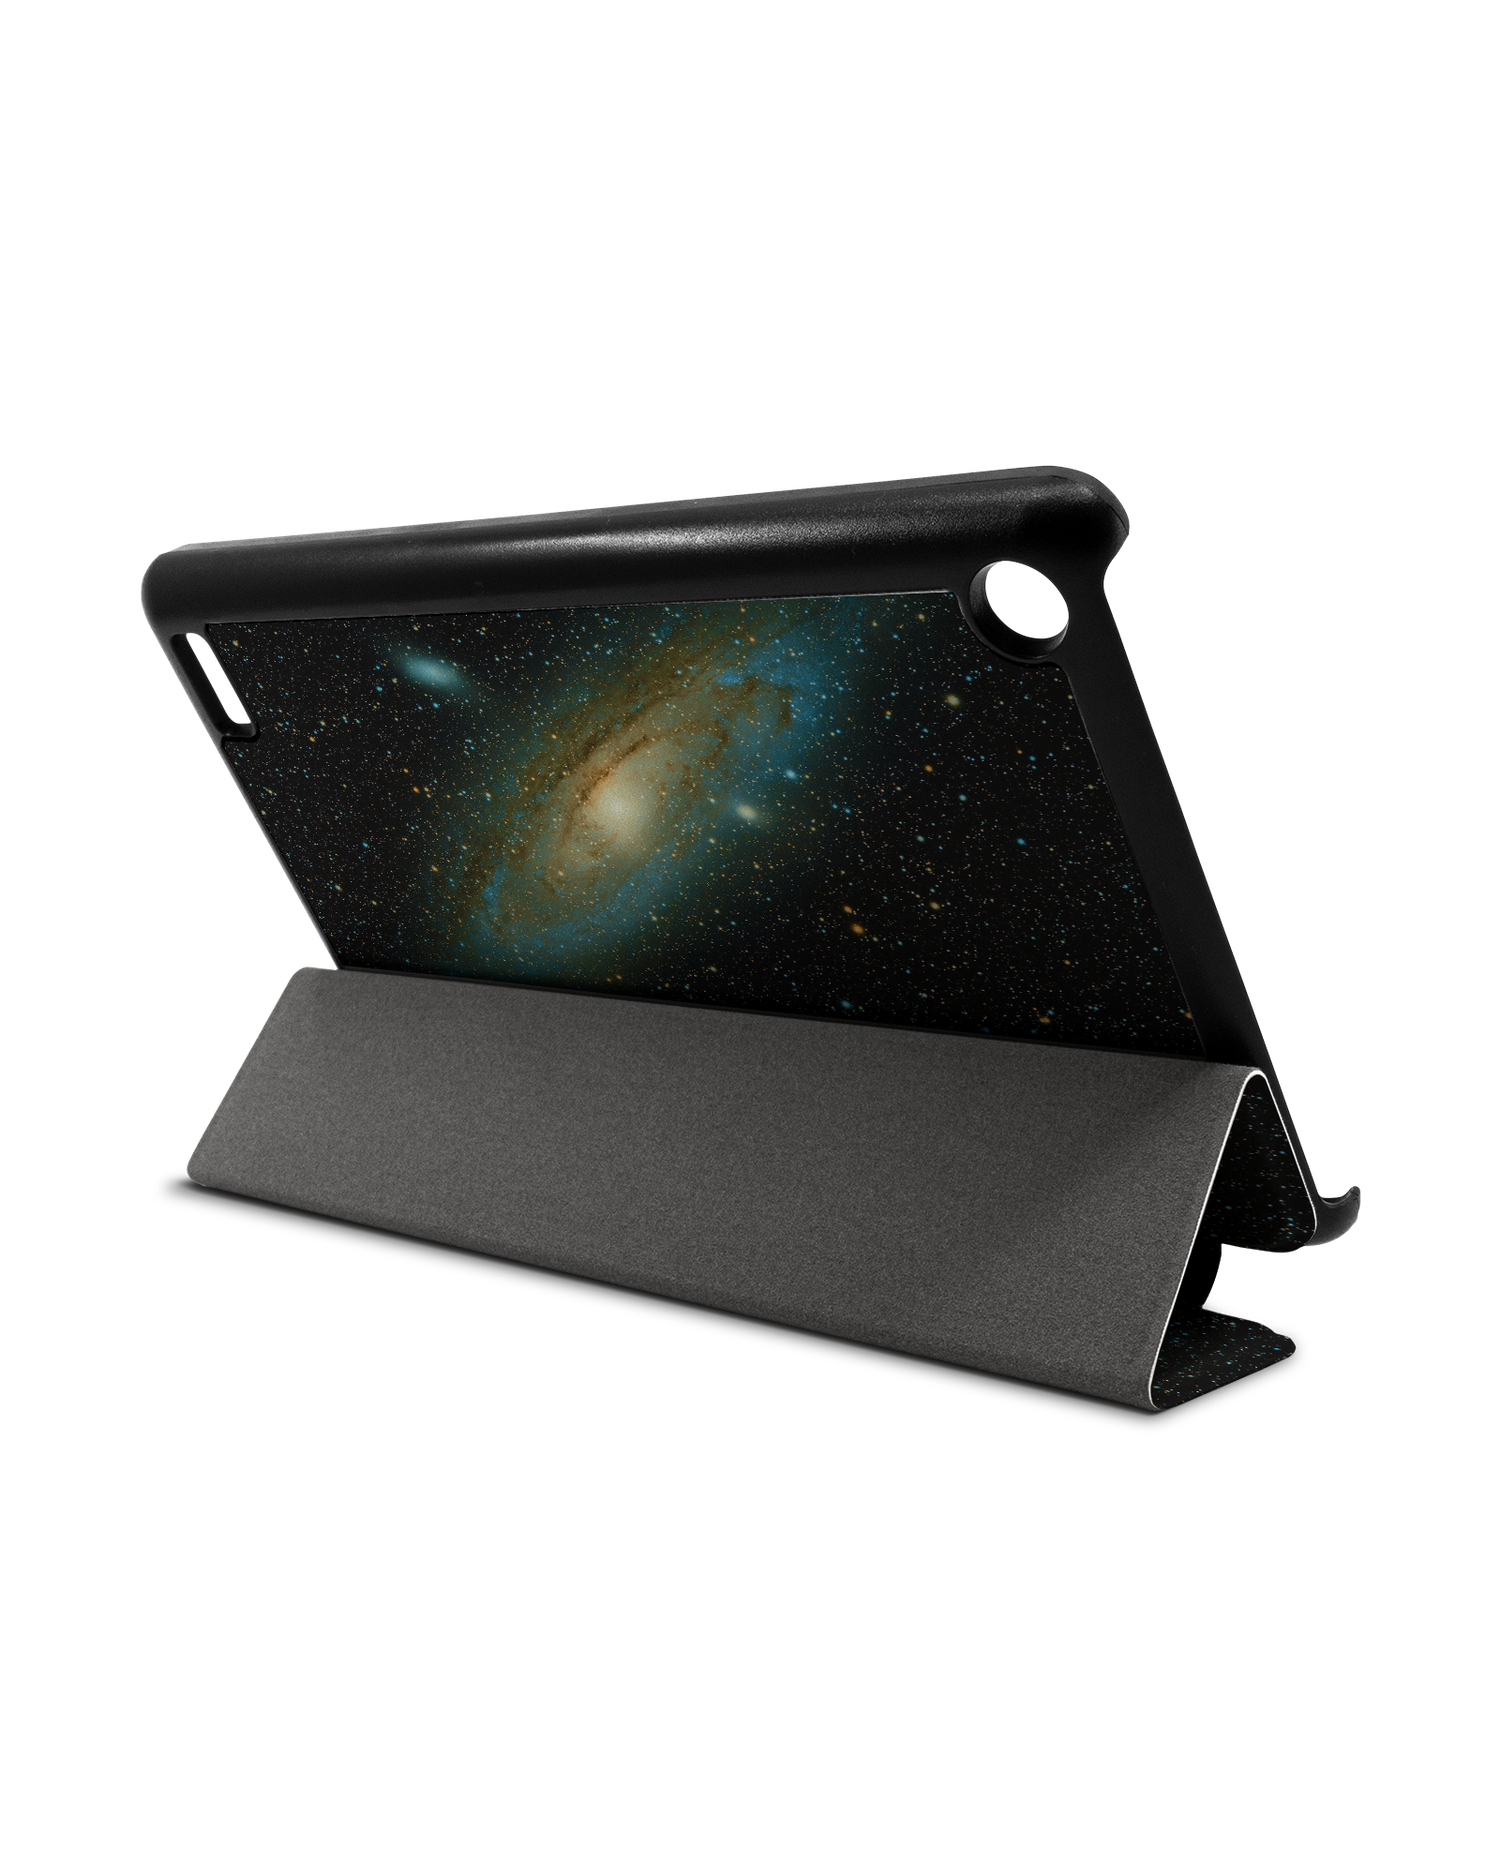 Outer Space Tablet Smart Case for Amazon Fire 7: Used as Stand